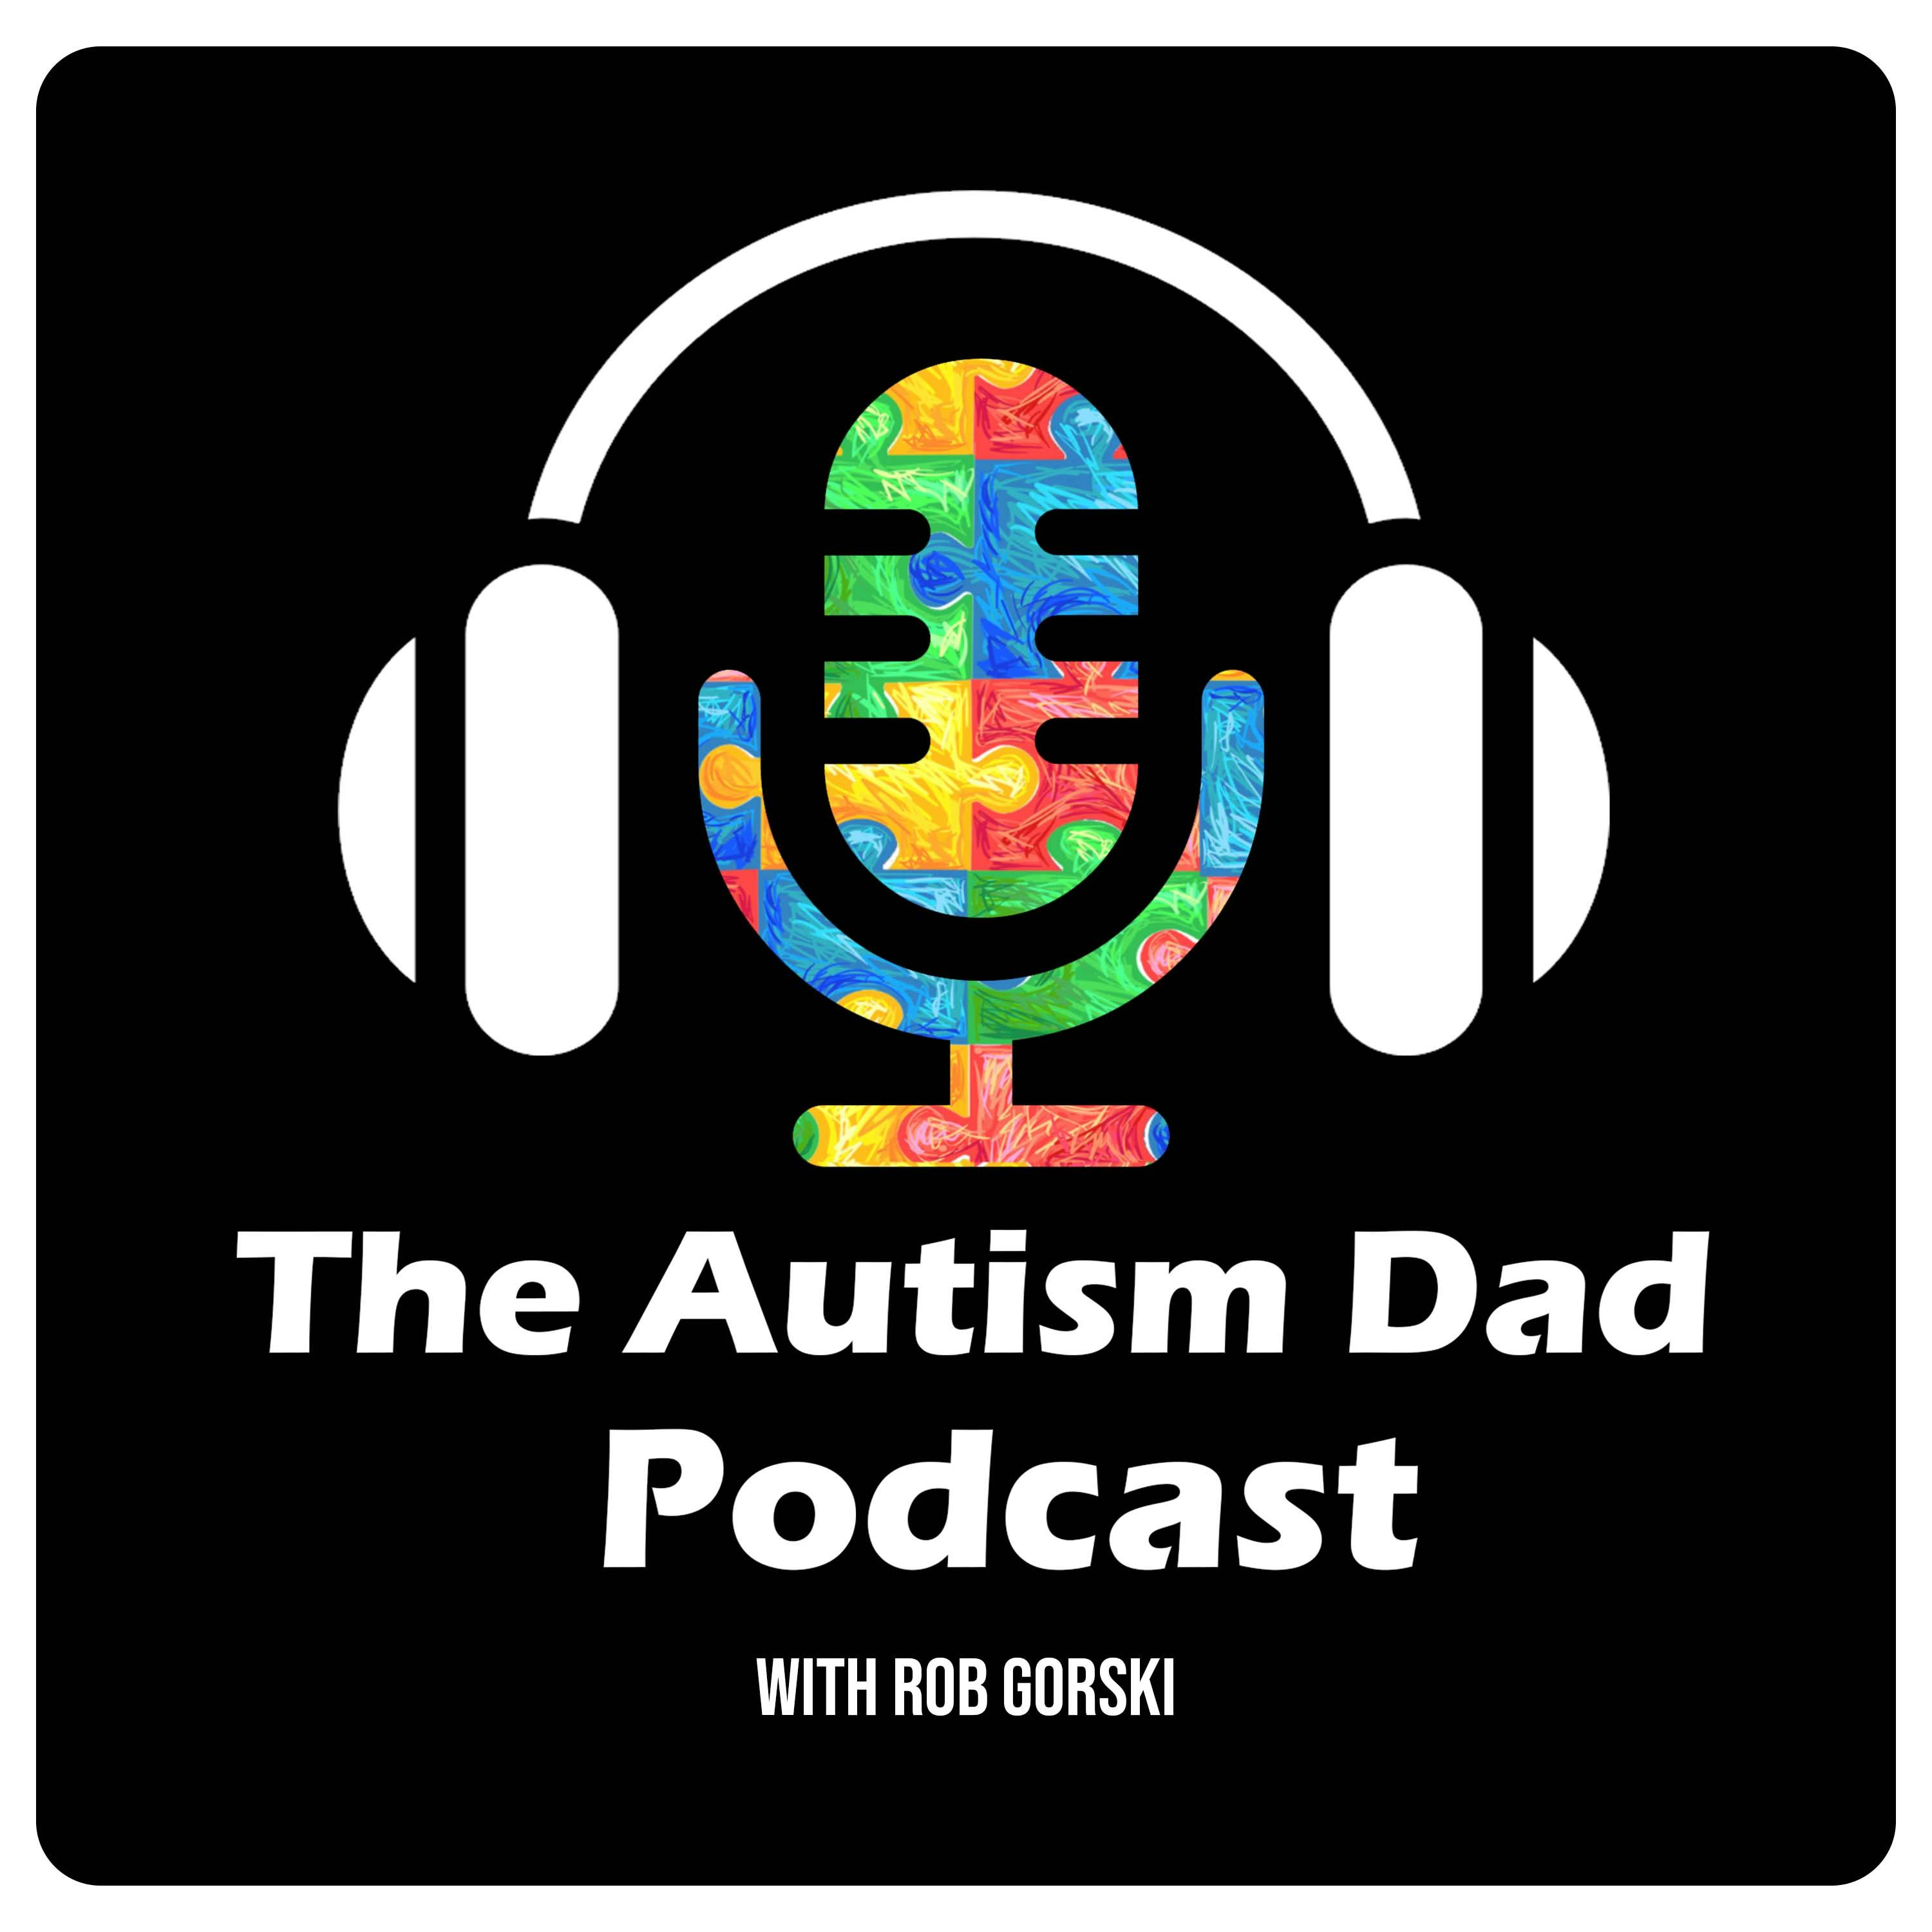 Welcome to The Autism Dad Podcast